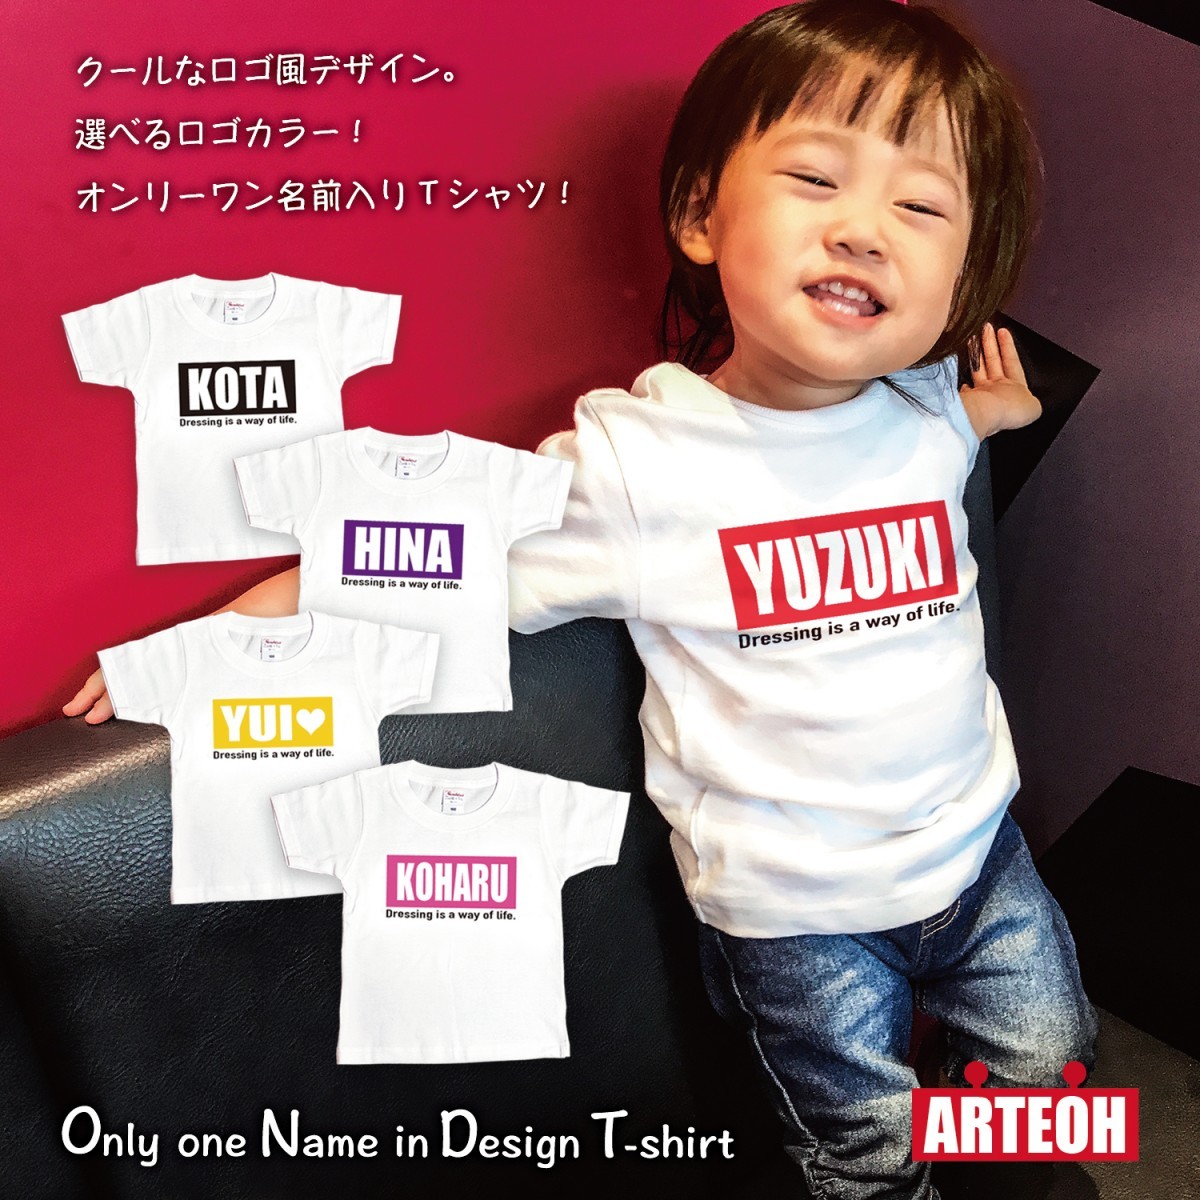  name entering name inserting Logo manner T-shirt child clothes pair present celebration of a birth birthday gift Kids lovely good-looking dressing up present 